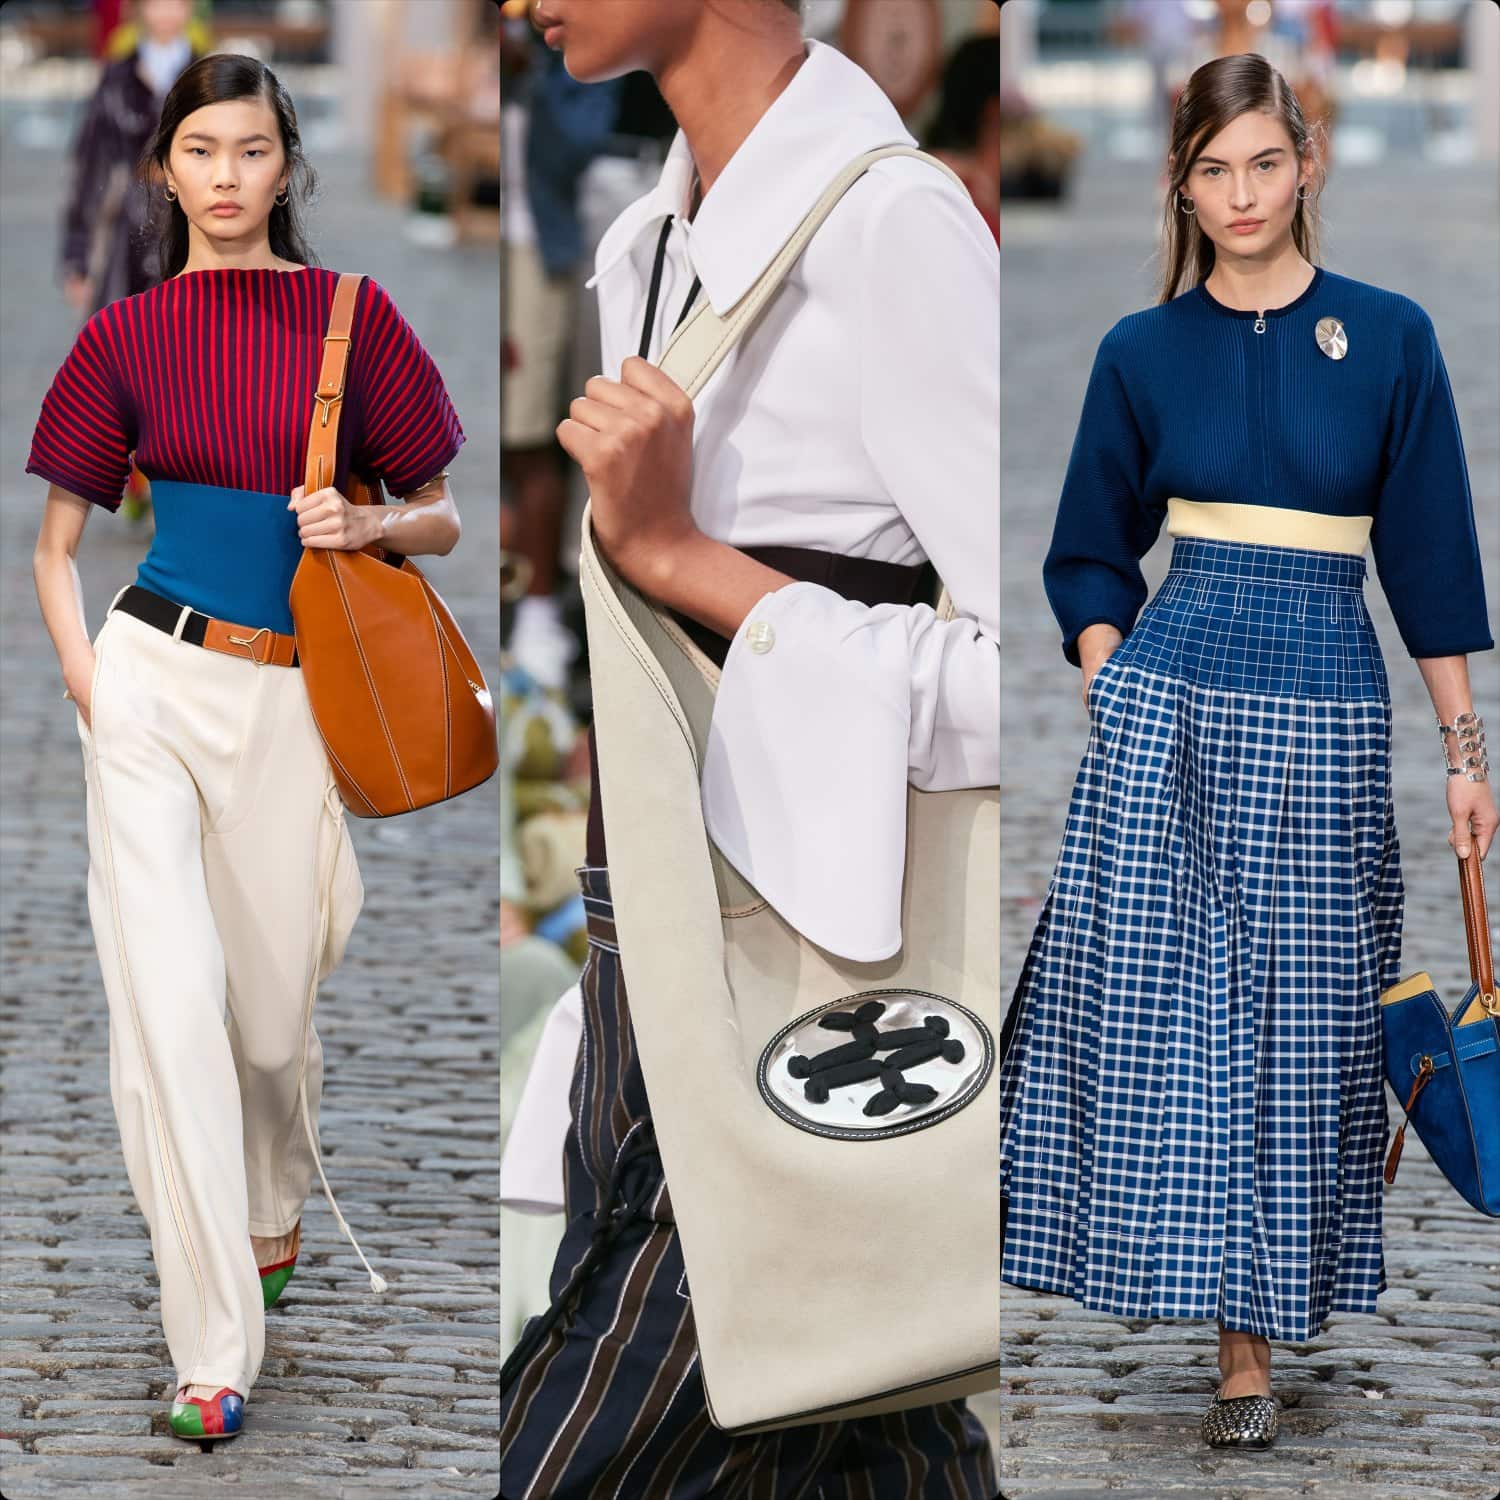 Tory Burch Has A New Spring Collection, And We Want Everything - ITG